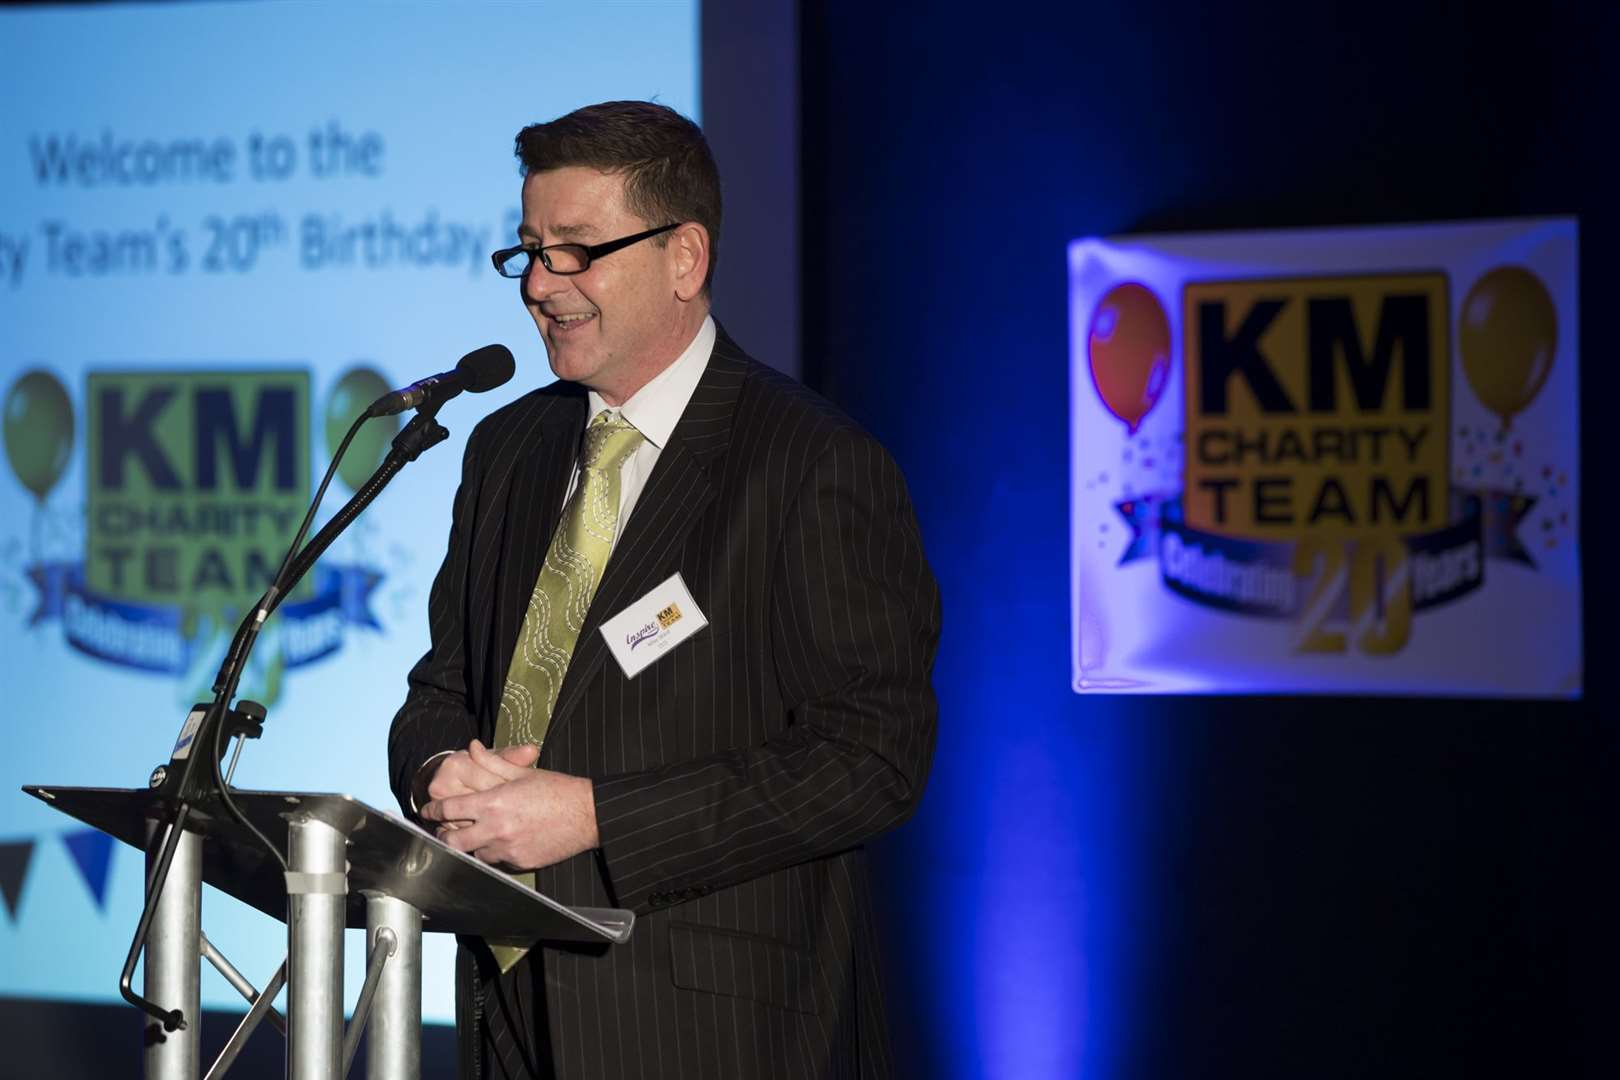 KM Charity Team CEO Mike Ward. (36730788)